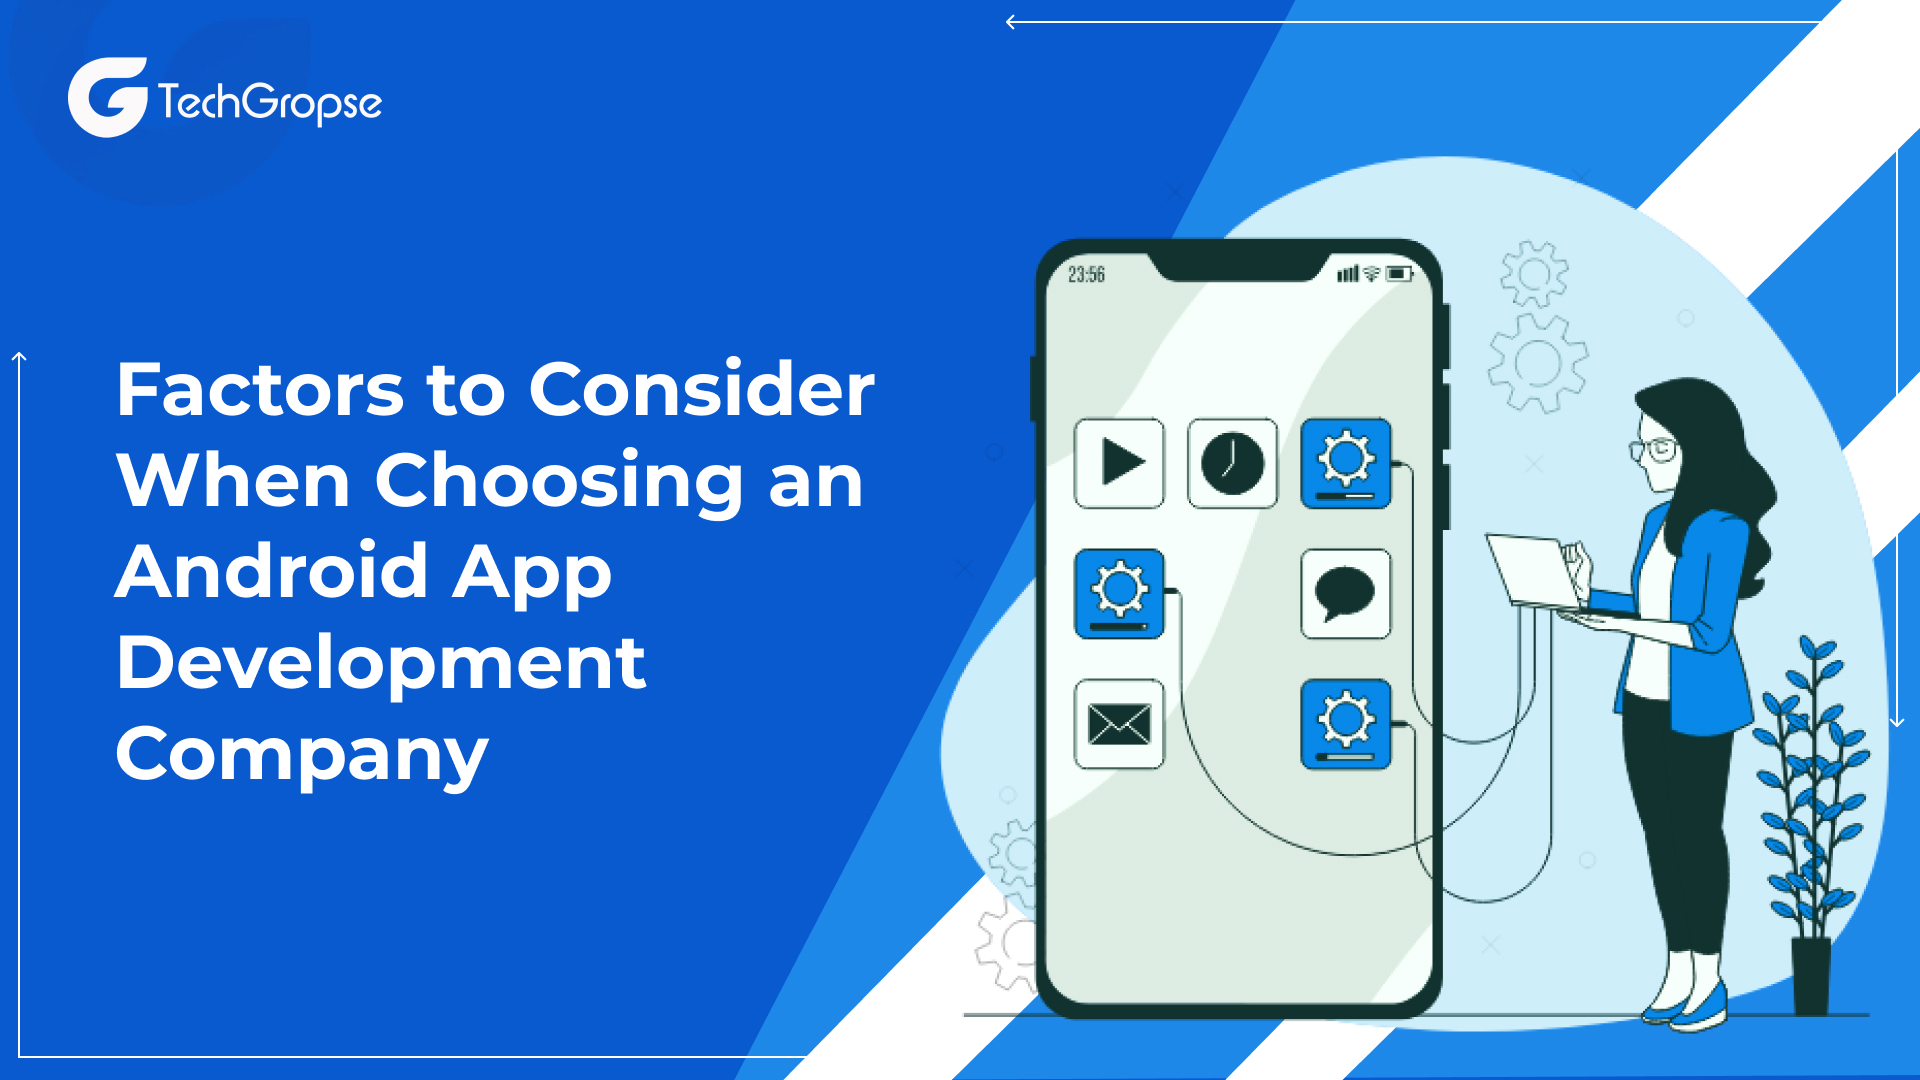 Factors to Consider When Choosing an Android App Development Company